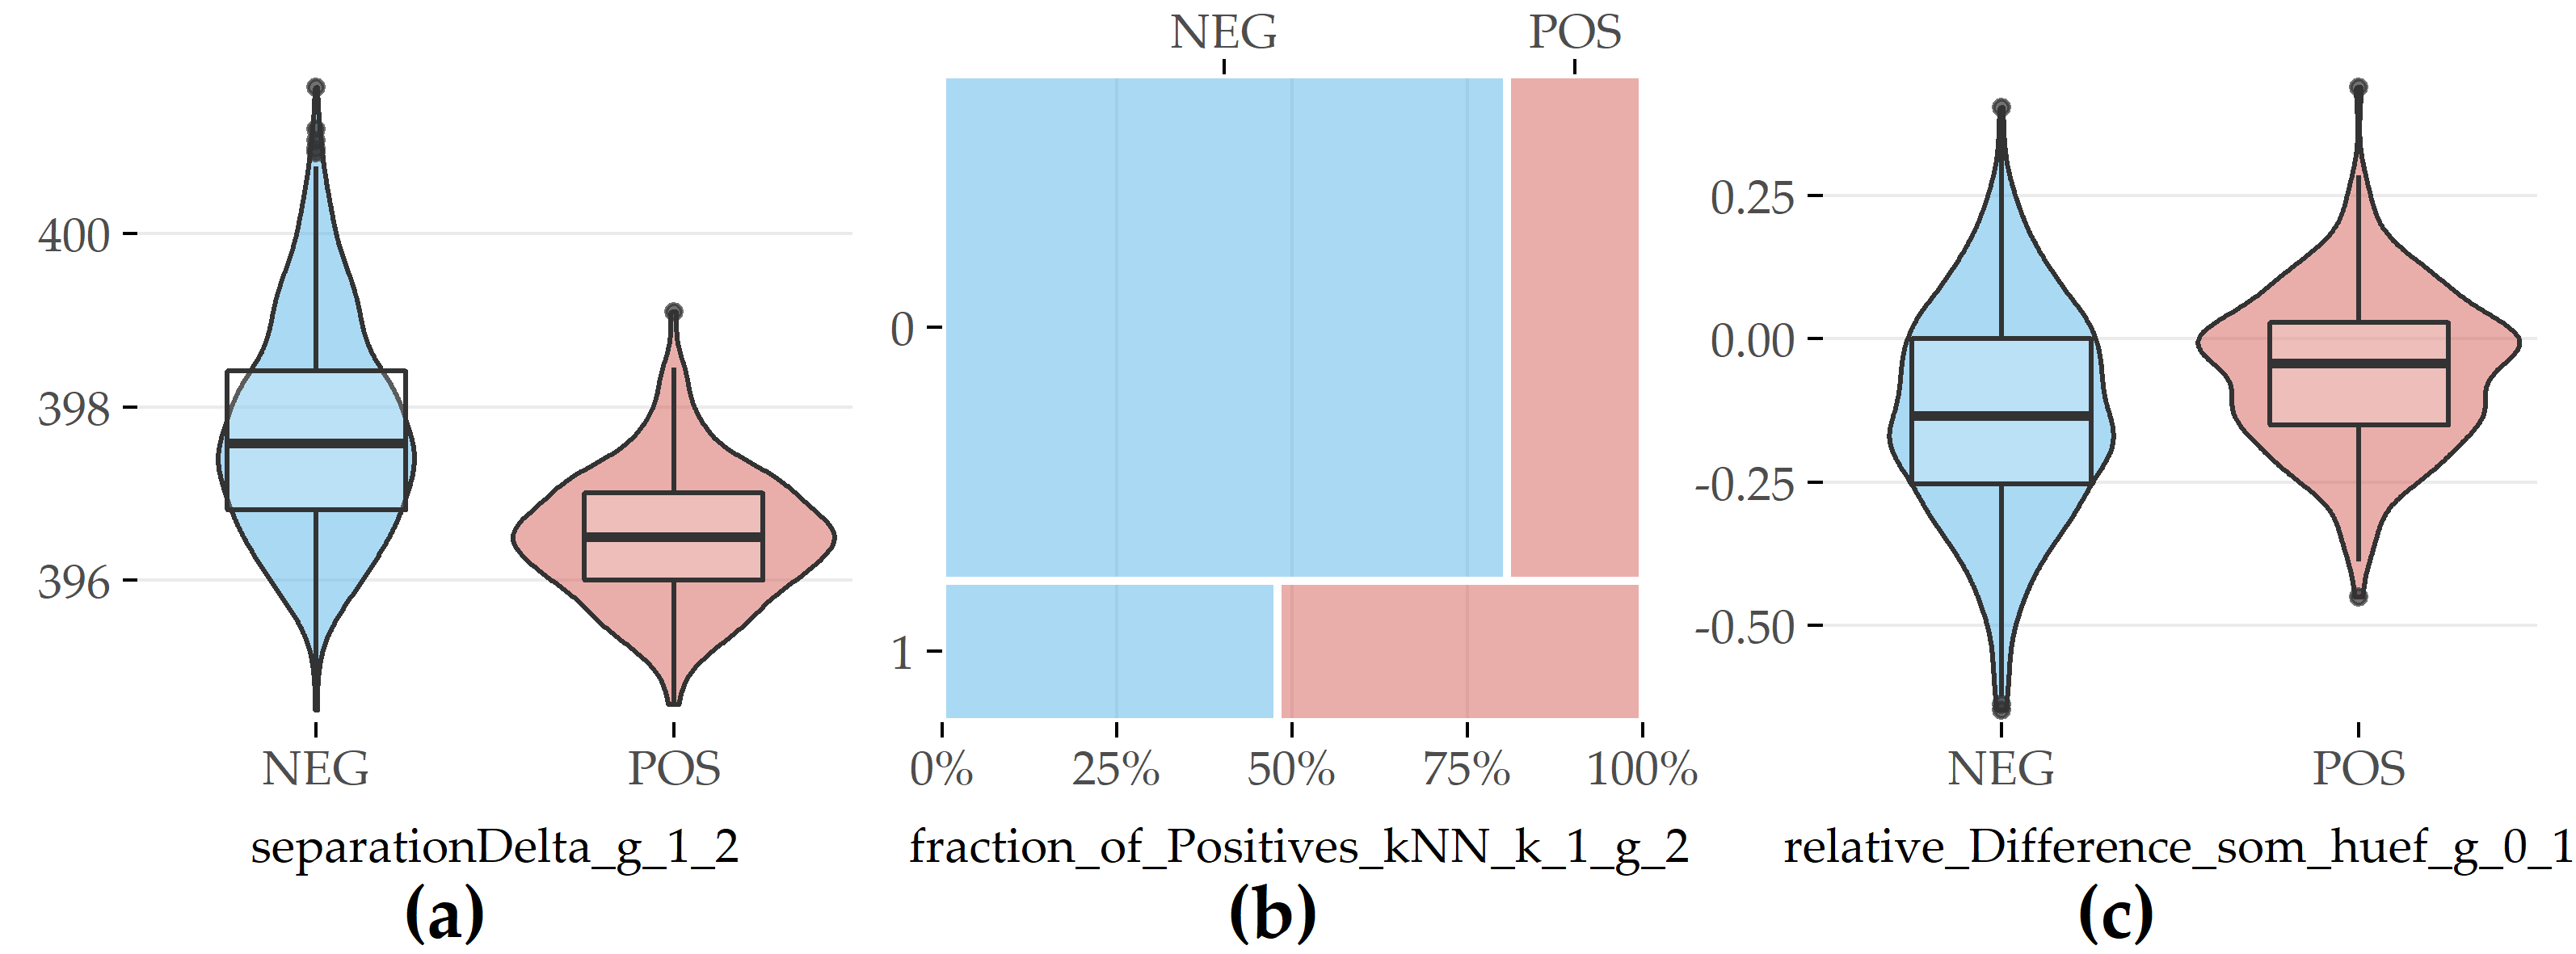 Selected evolution features with the highest contribution to class separation for PartitionAll. (a) Difference in cluster separation between SHIP-1 and SHIP-2. (b) Whether (=1) or not (=0) the nearest neighbor is of the positive class in SHIP-2. (c) Relative difference in hip circumference between SHIP-0 and SHIP-1.